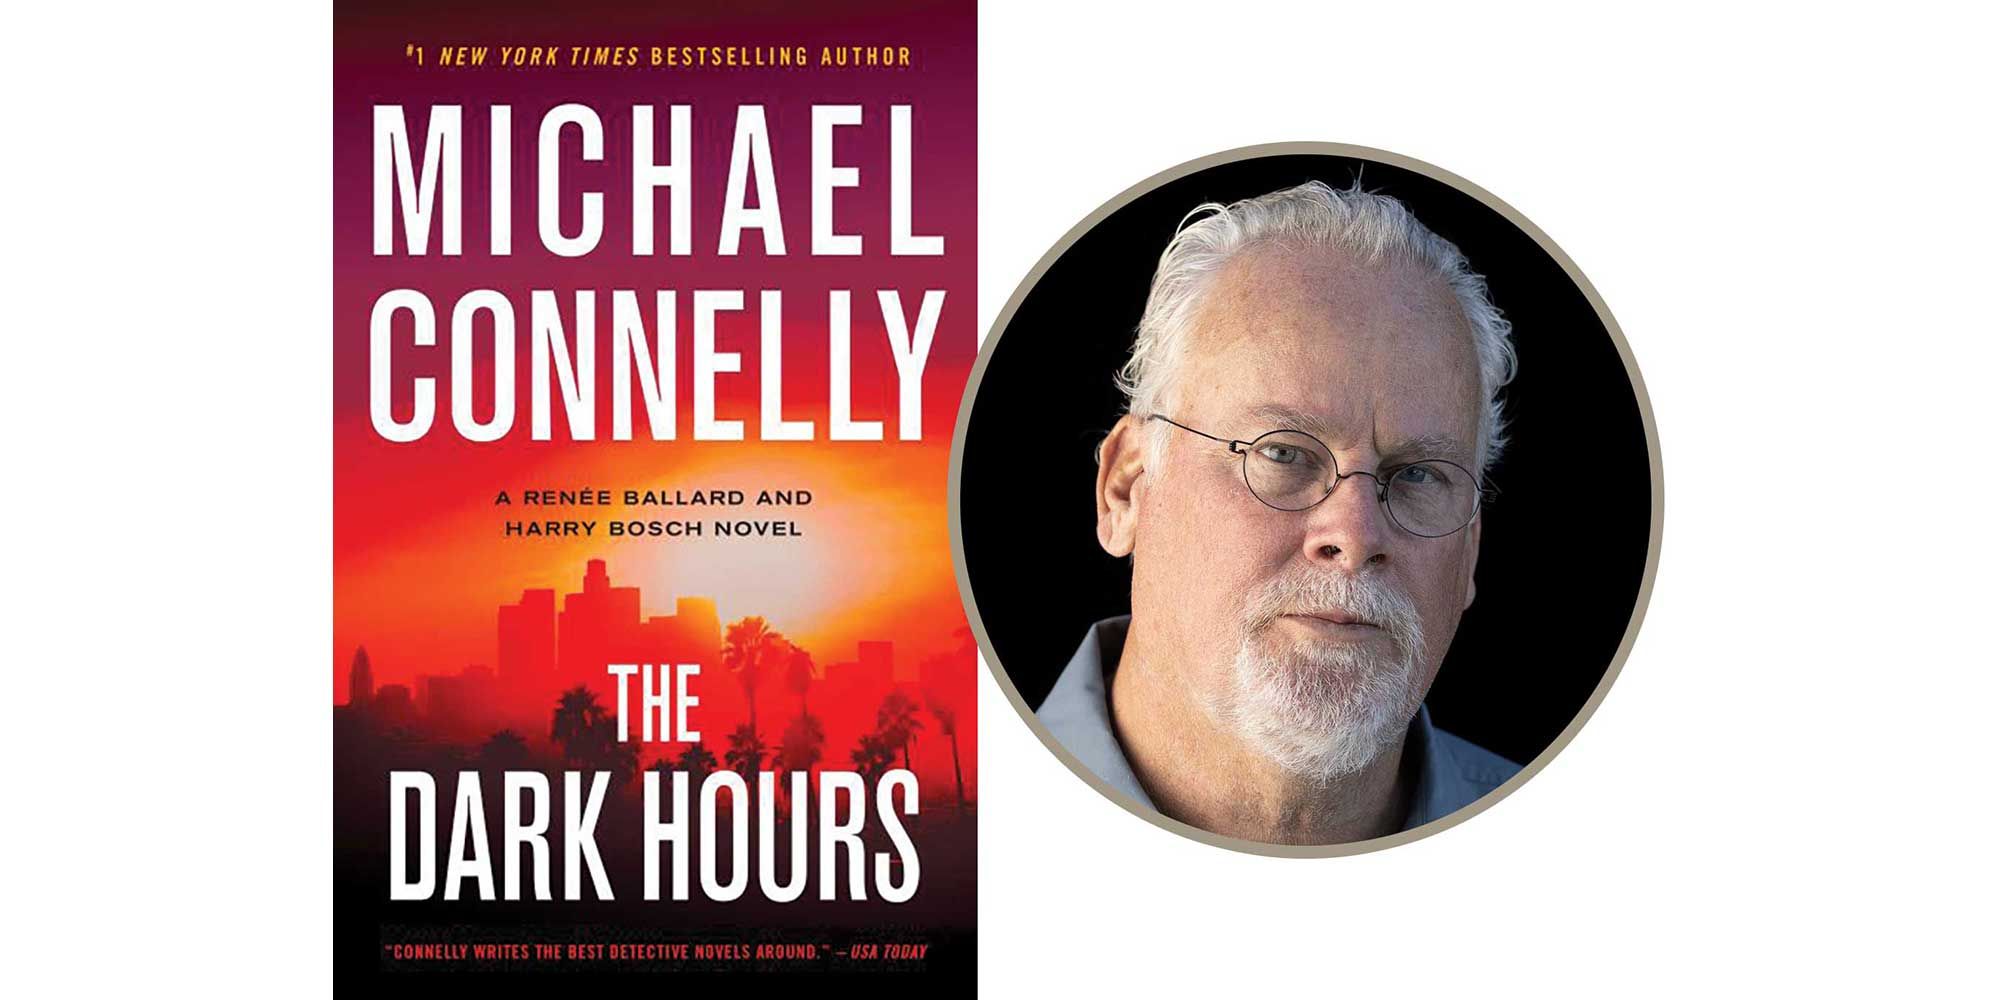 A conversation with Michael Connelly